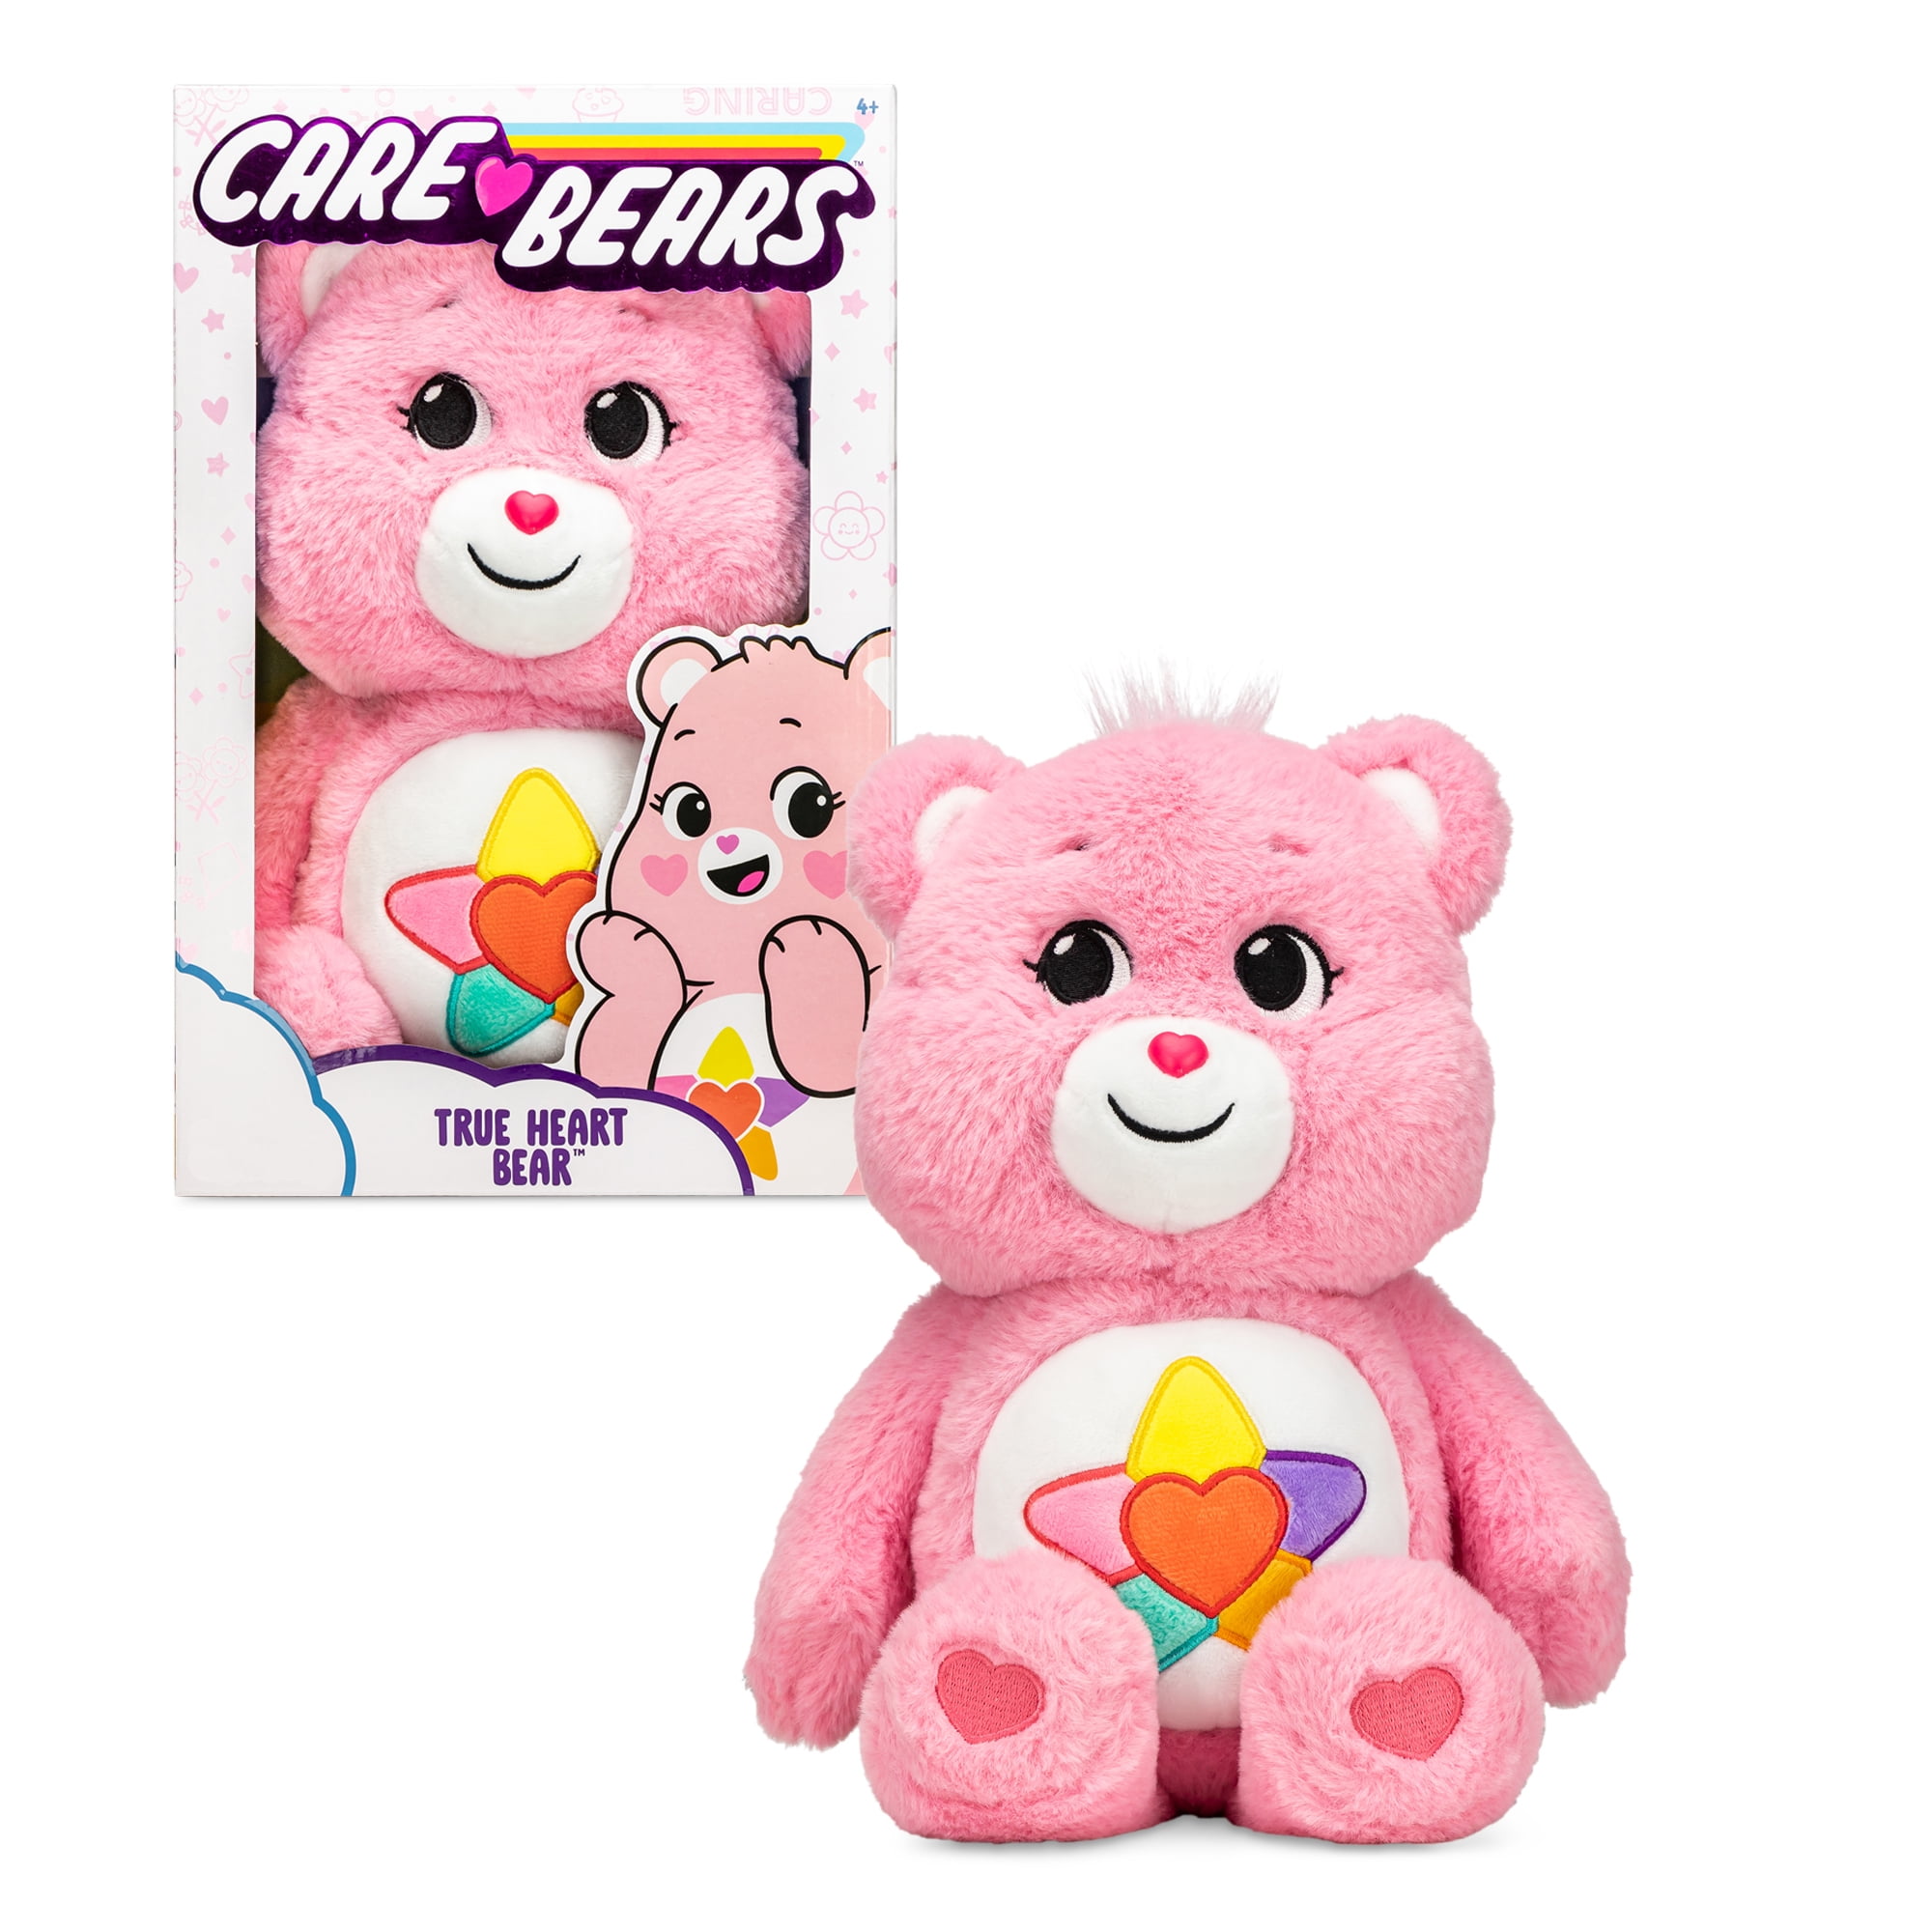 SHARE CARE BEAR BAG / KEY CLIP 6 INCHES, SOFT TOY TEDDY BRAND NEW 15CM 